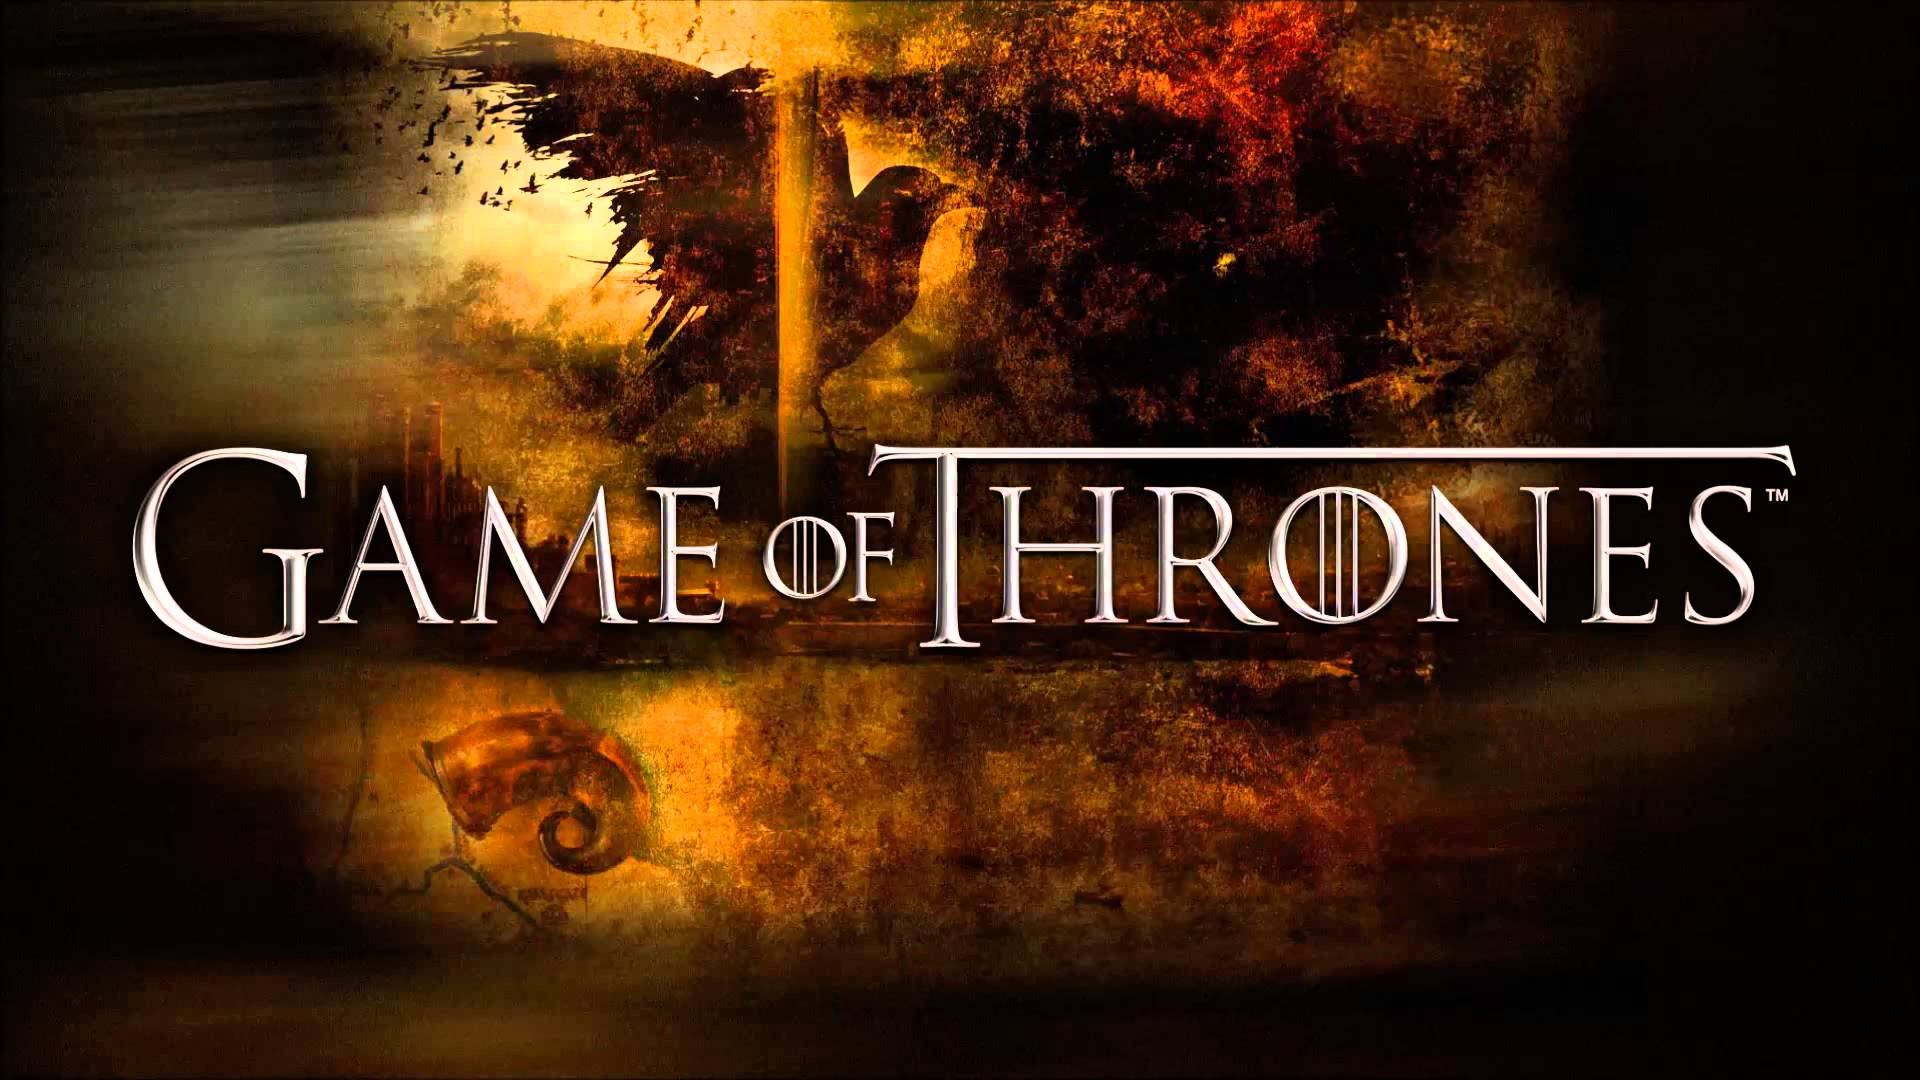 Game of Thrones Poster Wallpaper with high-resolution 1920x1080 pixel. You can use this poster wallpaper for your Desktop Computers, Mac Screensavers, Windows Backgrounds, iPhone Wallpapers, Tablet or Android Lock screen and another Mobile device